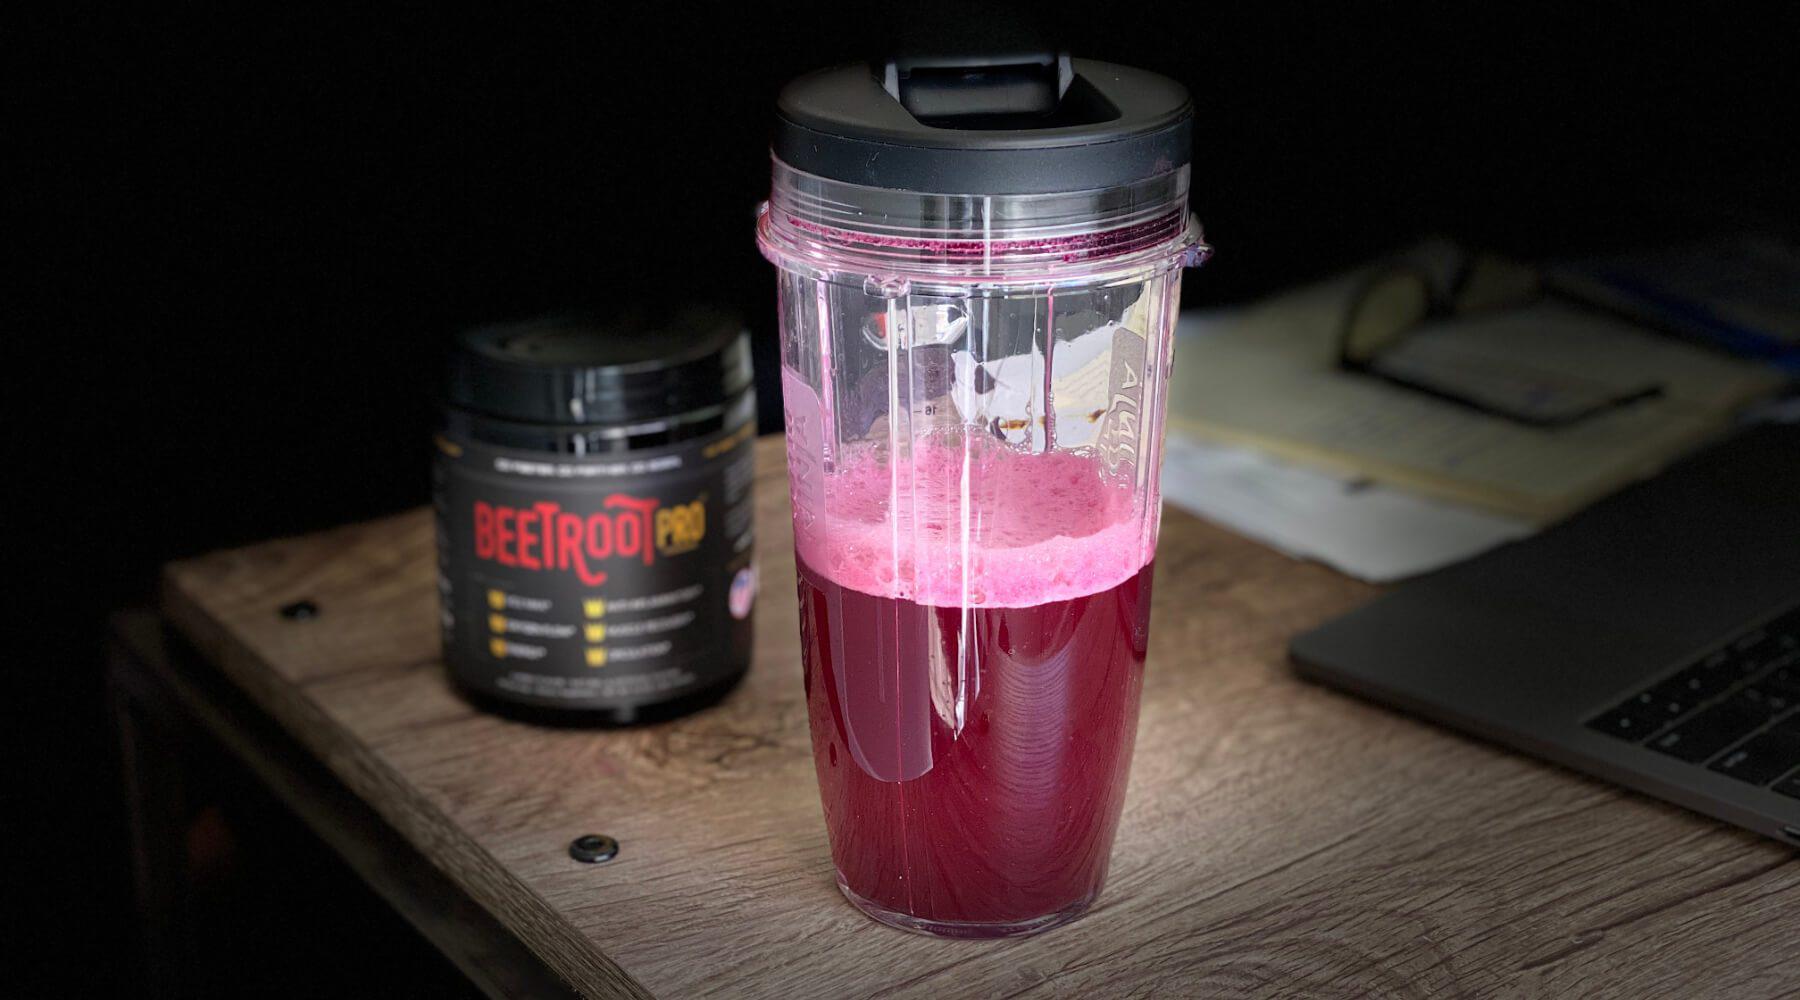 Get to know Beetroot Pro® better - Beetroot Pro® & Endurance360® Official Store